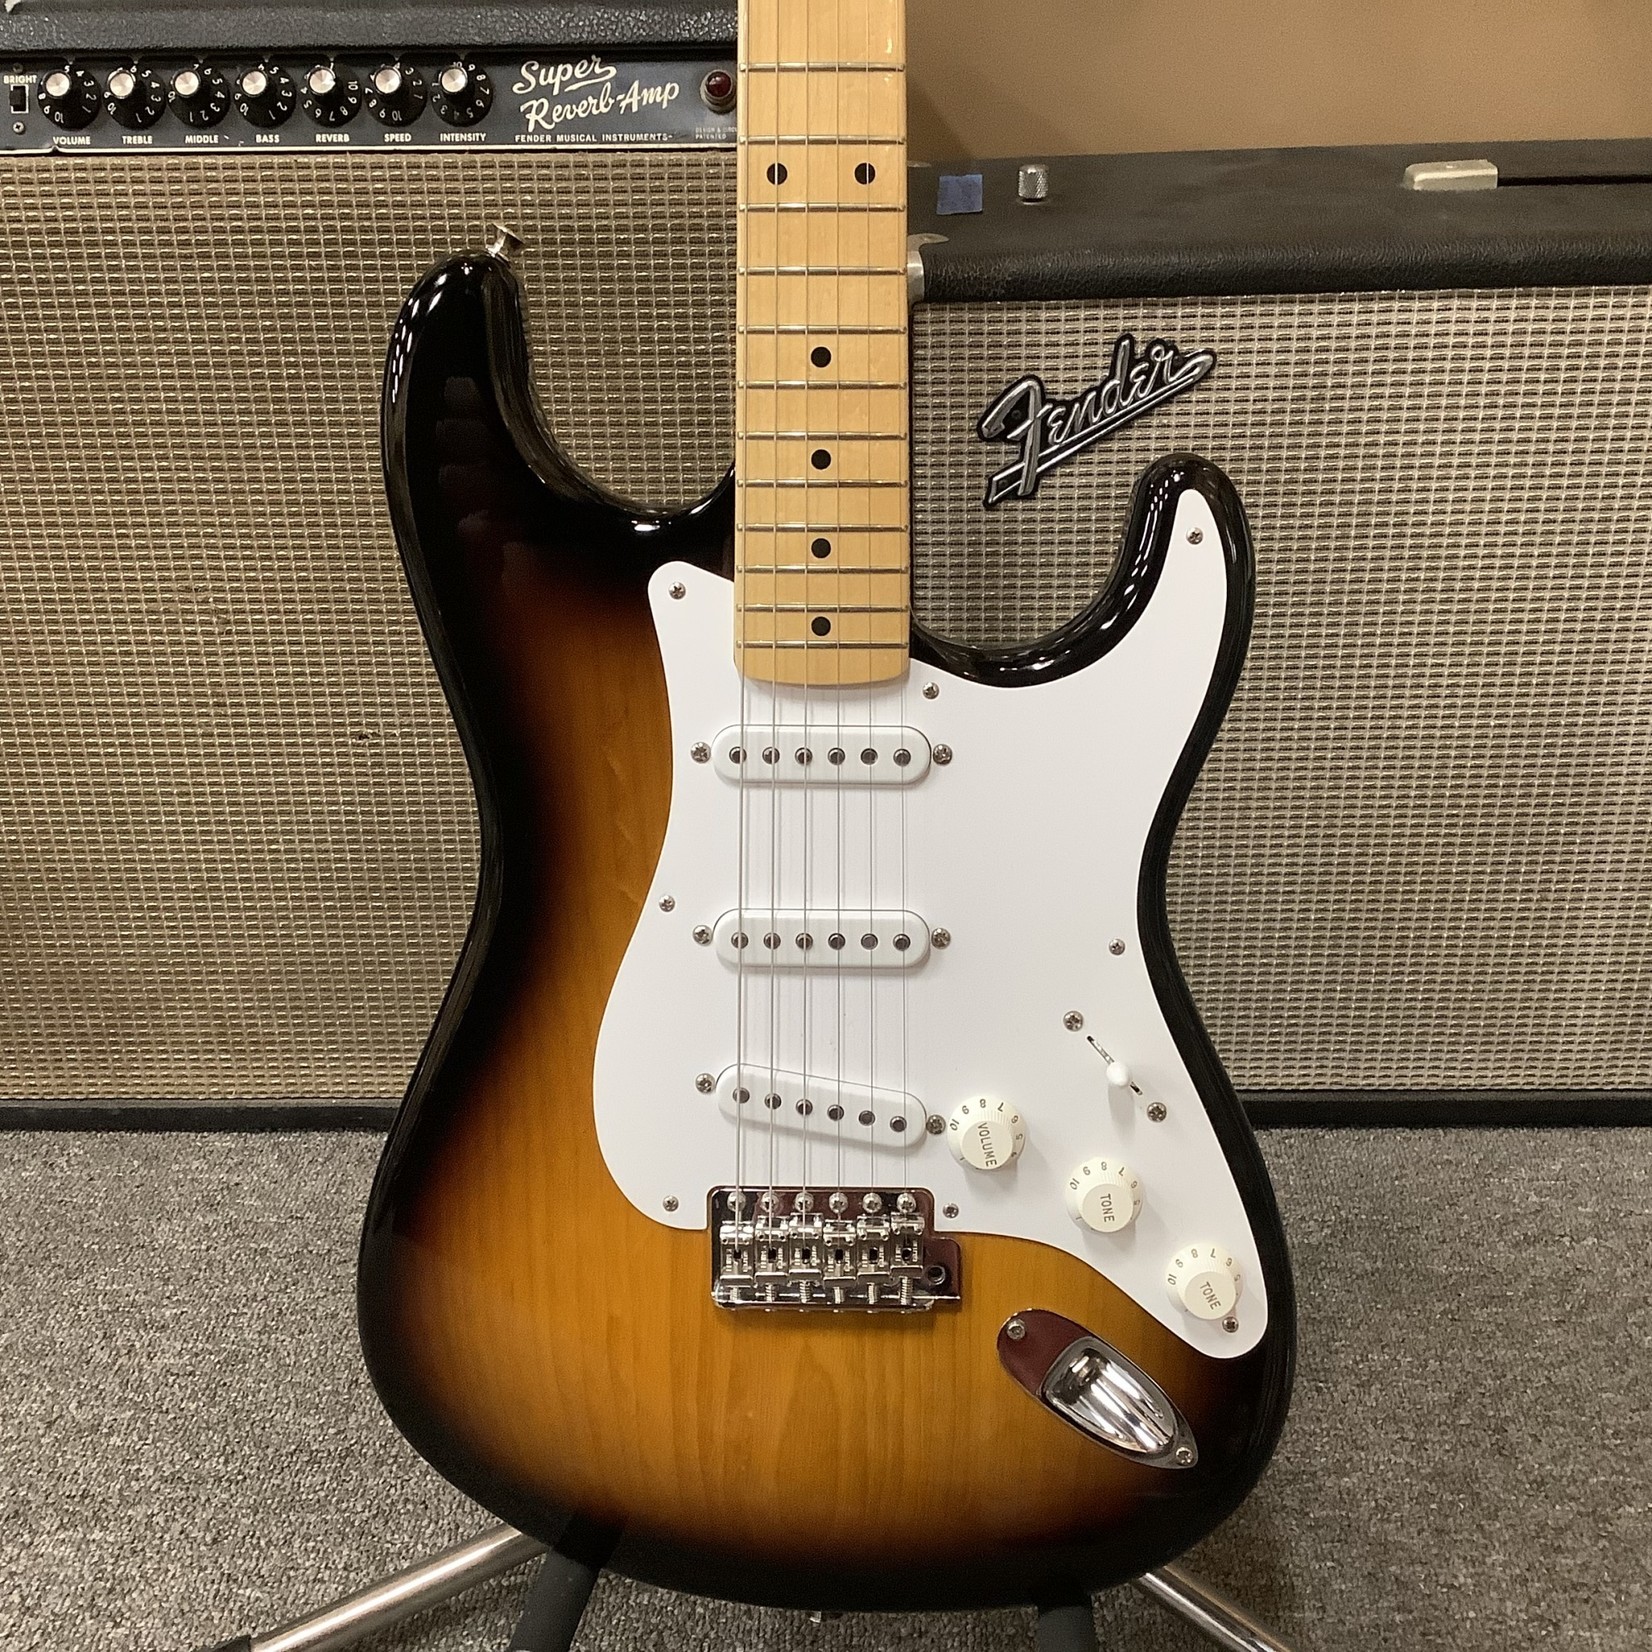 Guggenheim Museum Ready Rotate Fender Stratocaster 60th Anniversary, '54 Reissue, Limited Edition of  1,954, Two Tone Sunburst - Normans Rare Guitars